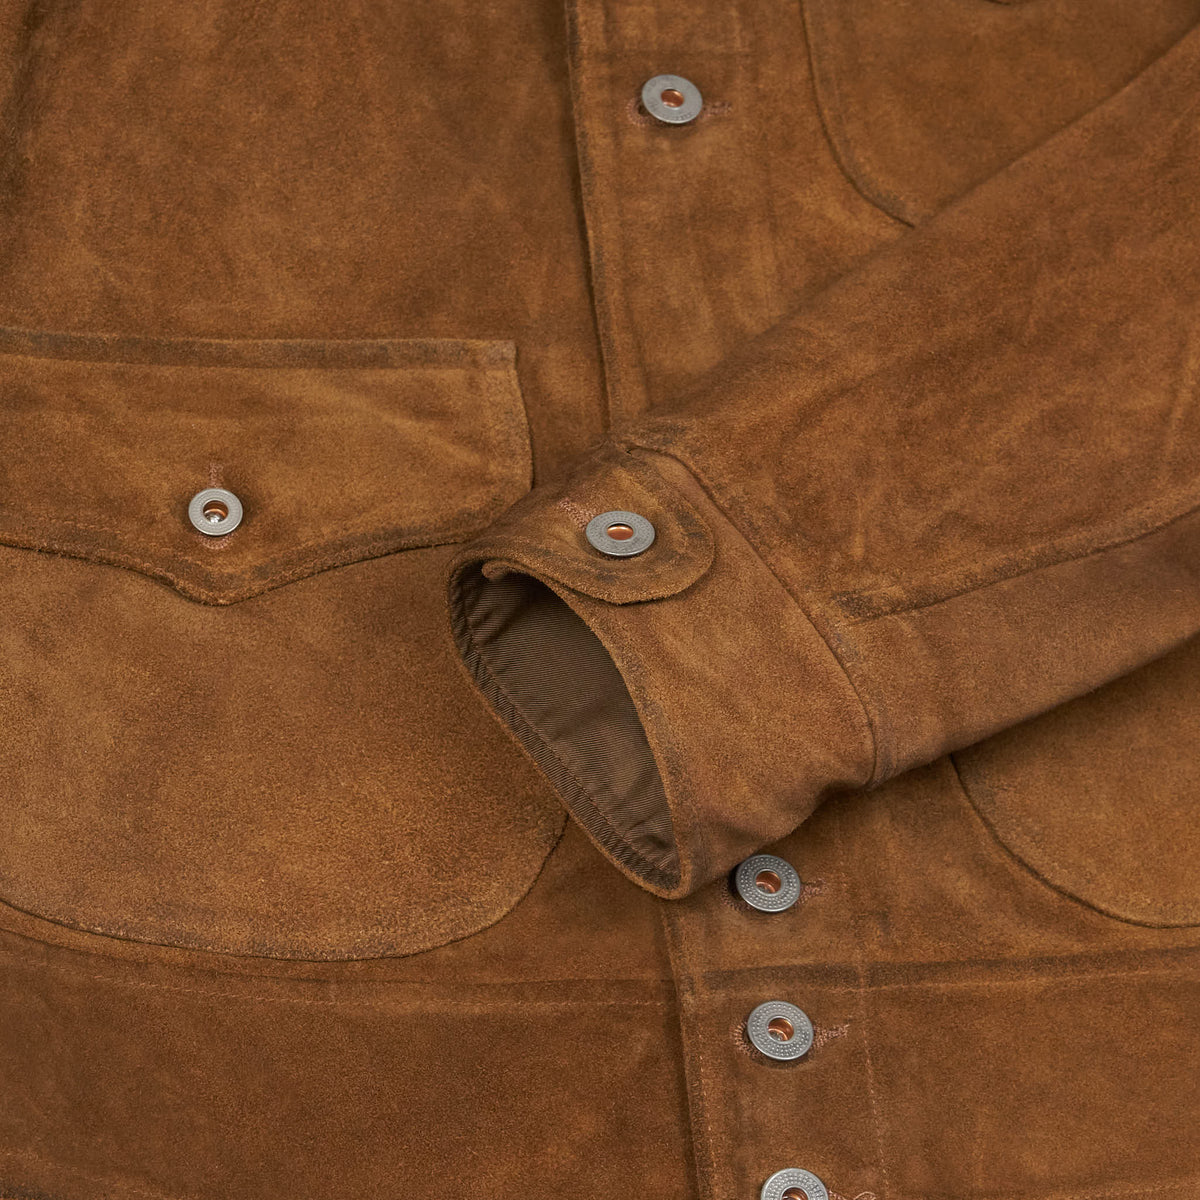 Double RL Suede Roughout Western Leather Jacket